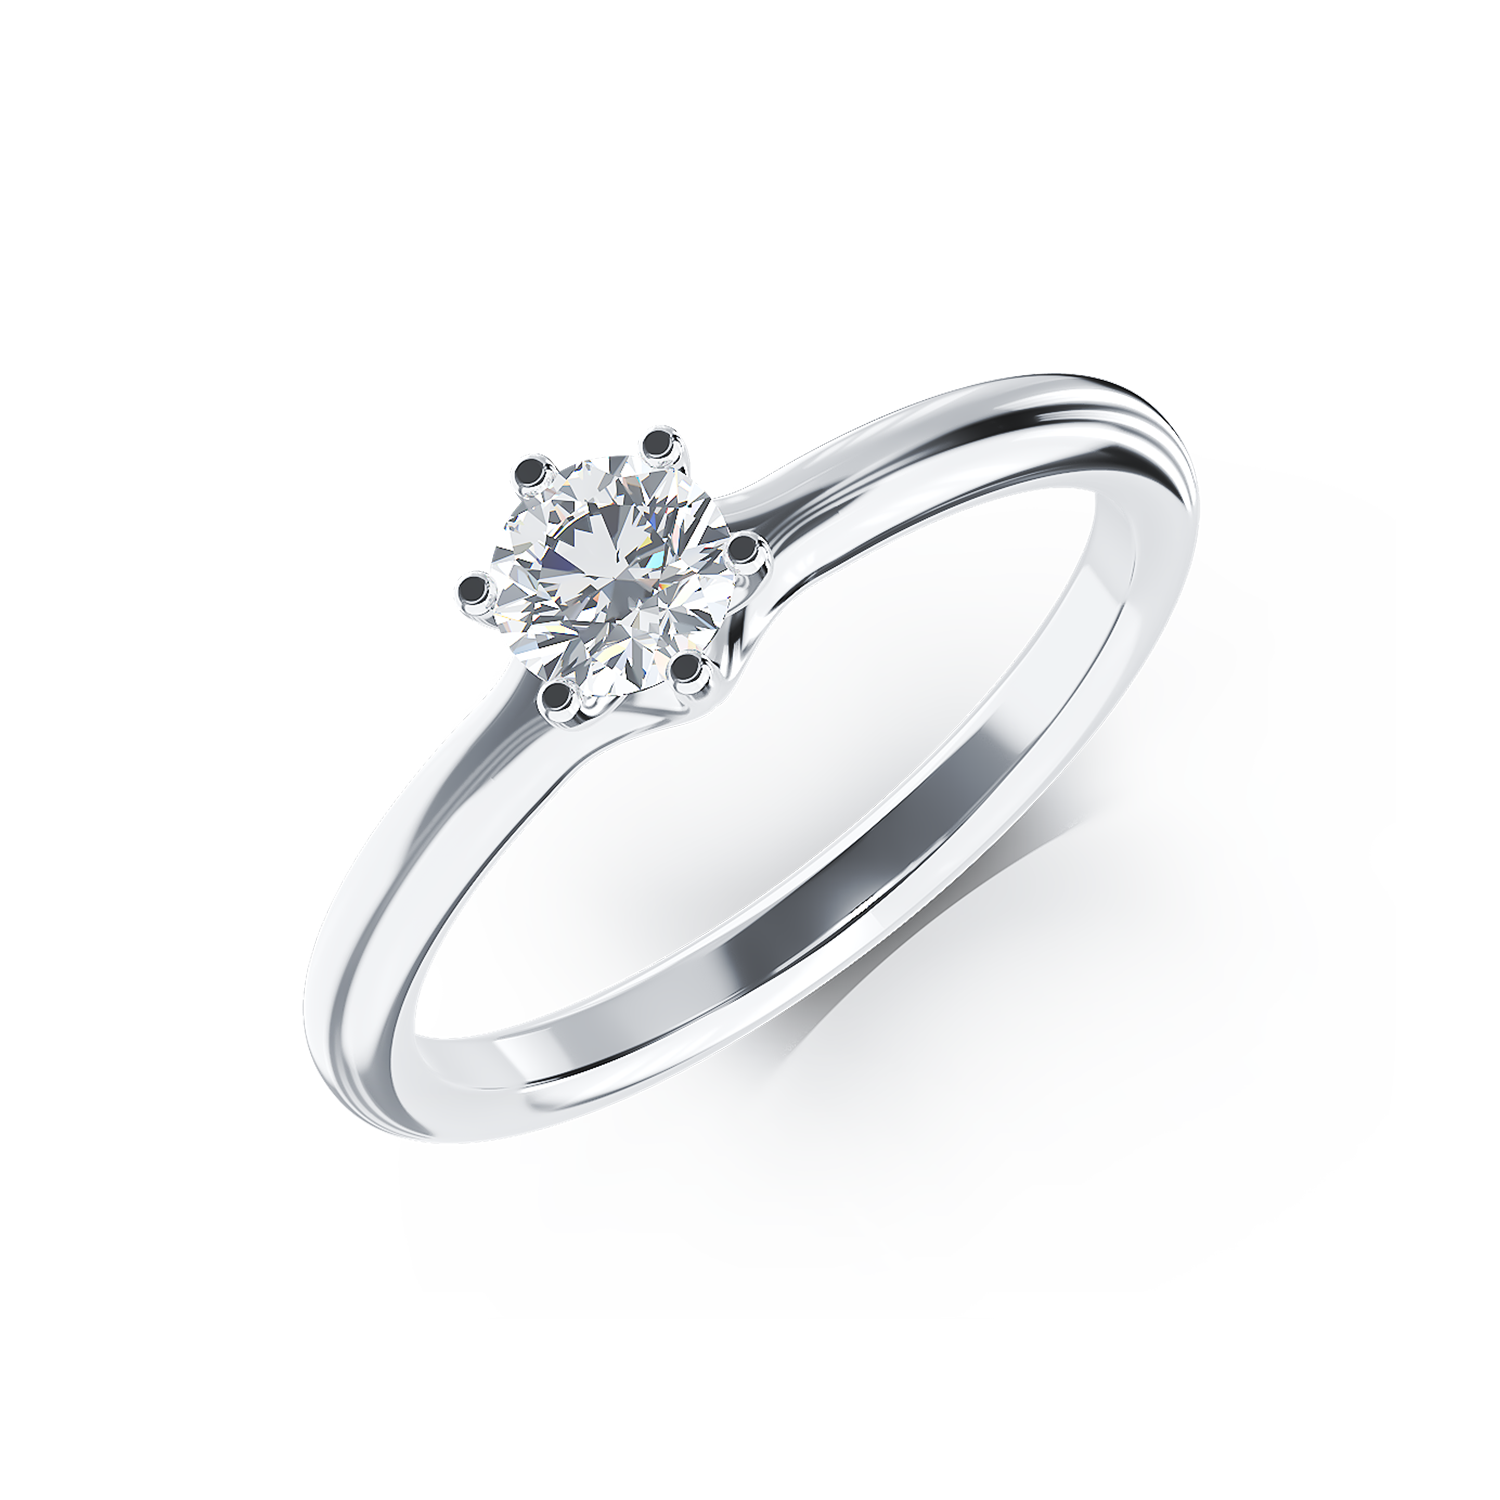 Platinum engagement ring with a 0.3ct solitaire diamond